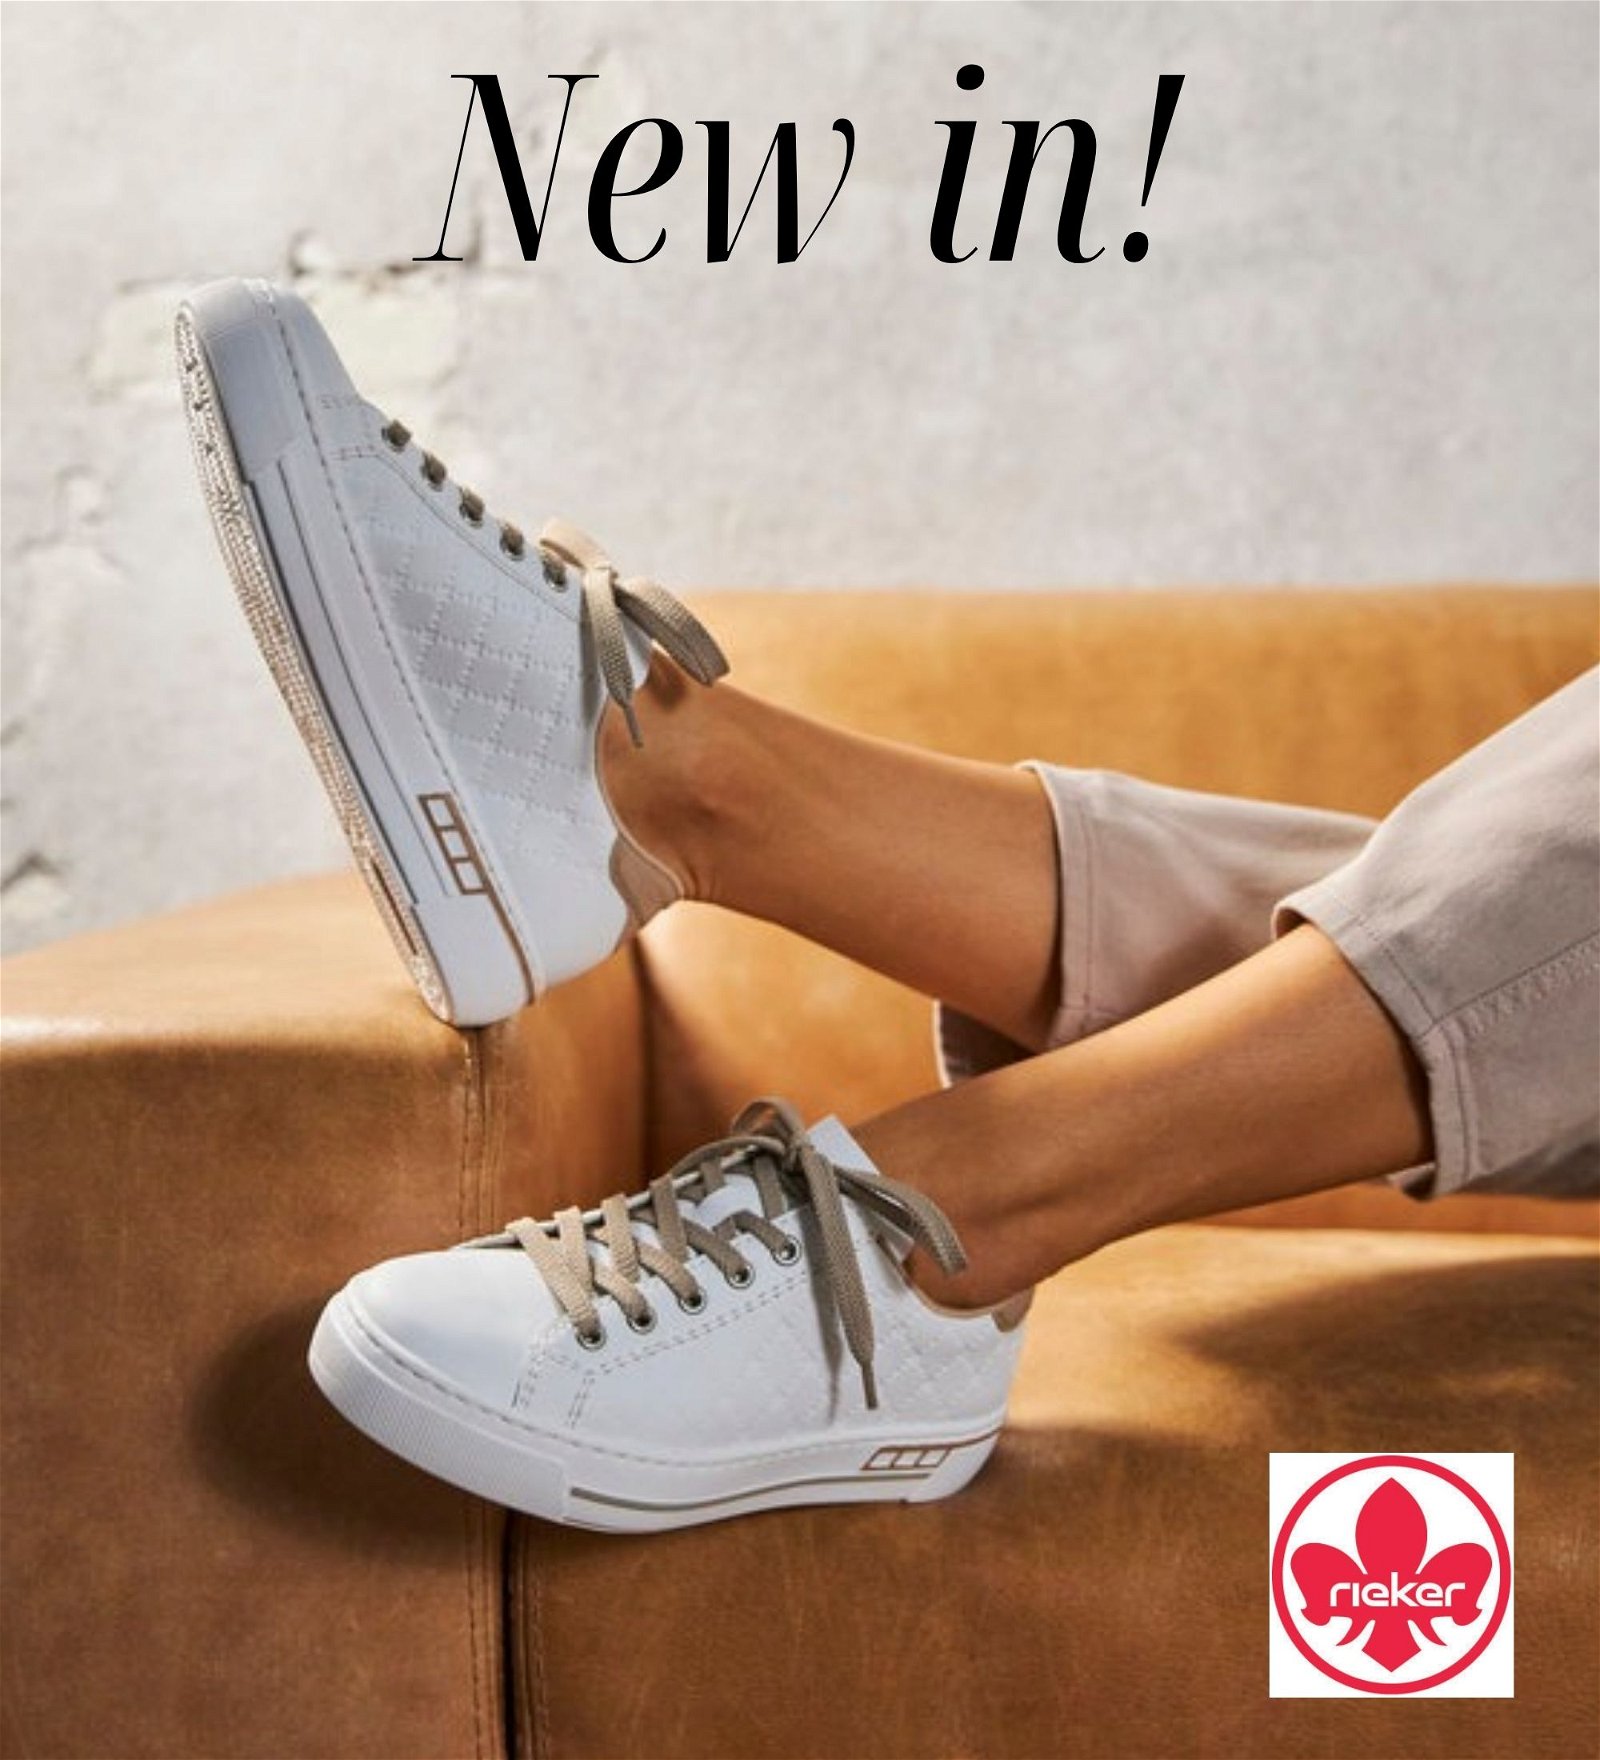 New in Rieker shoes, trainers and mary jane from Mozimo